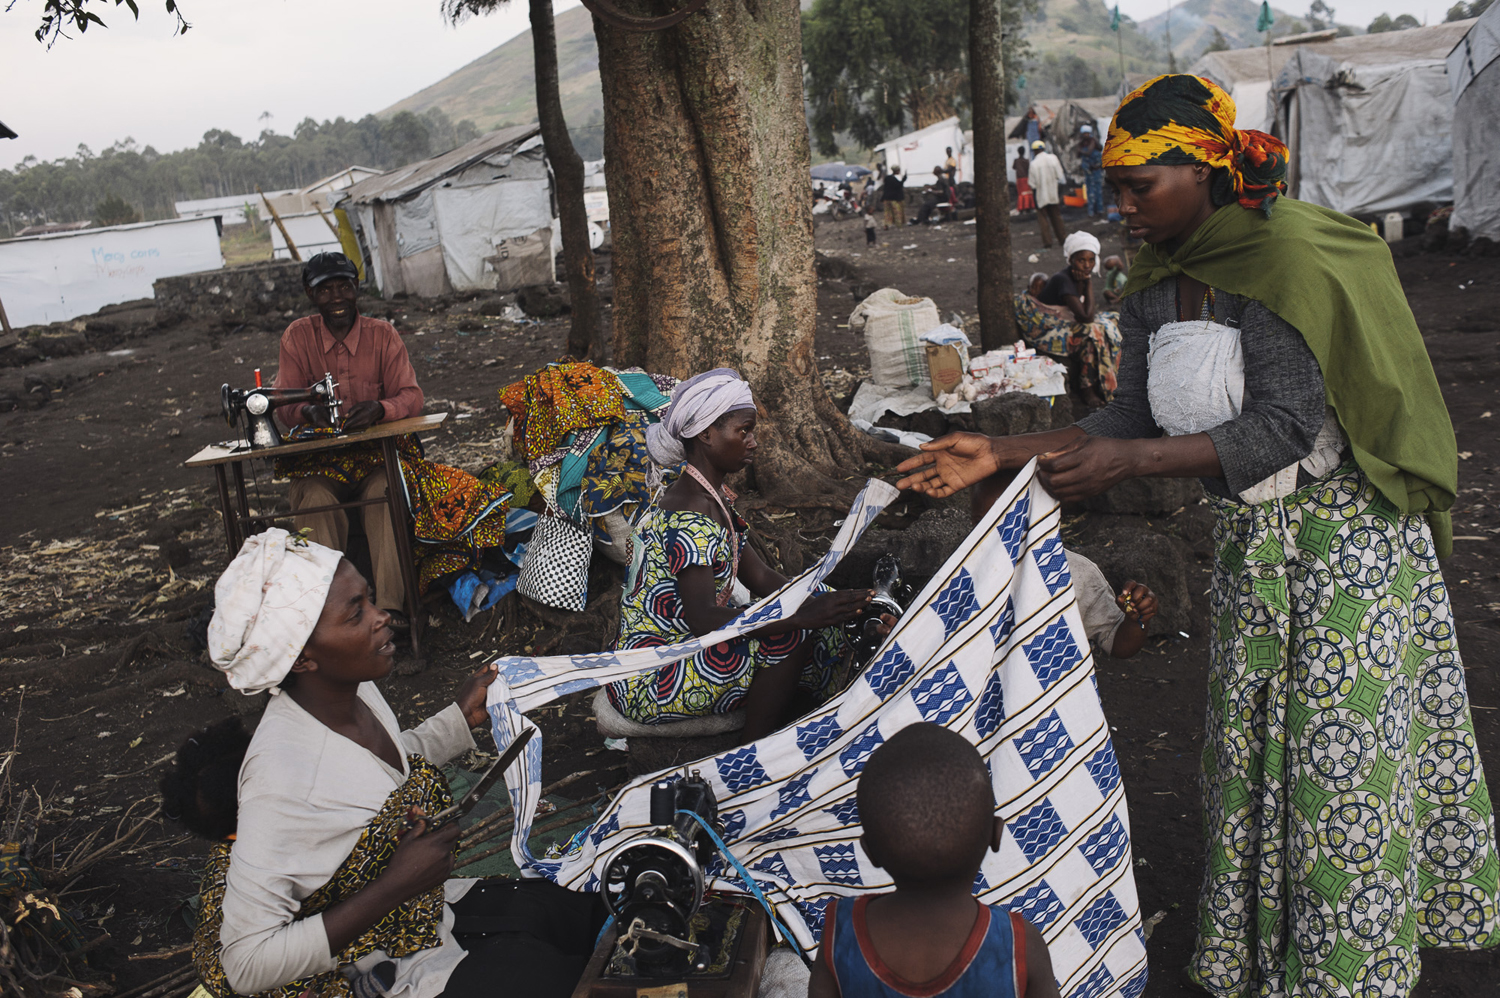 Displaced Congolese work as seamstresses in the small market of the Bulengo displacement site. When fleeing conflict, people take only what they can carry, but sewing machines can provide a vital source of income when arriving in camps such as Bulengo, July 14, 2014.